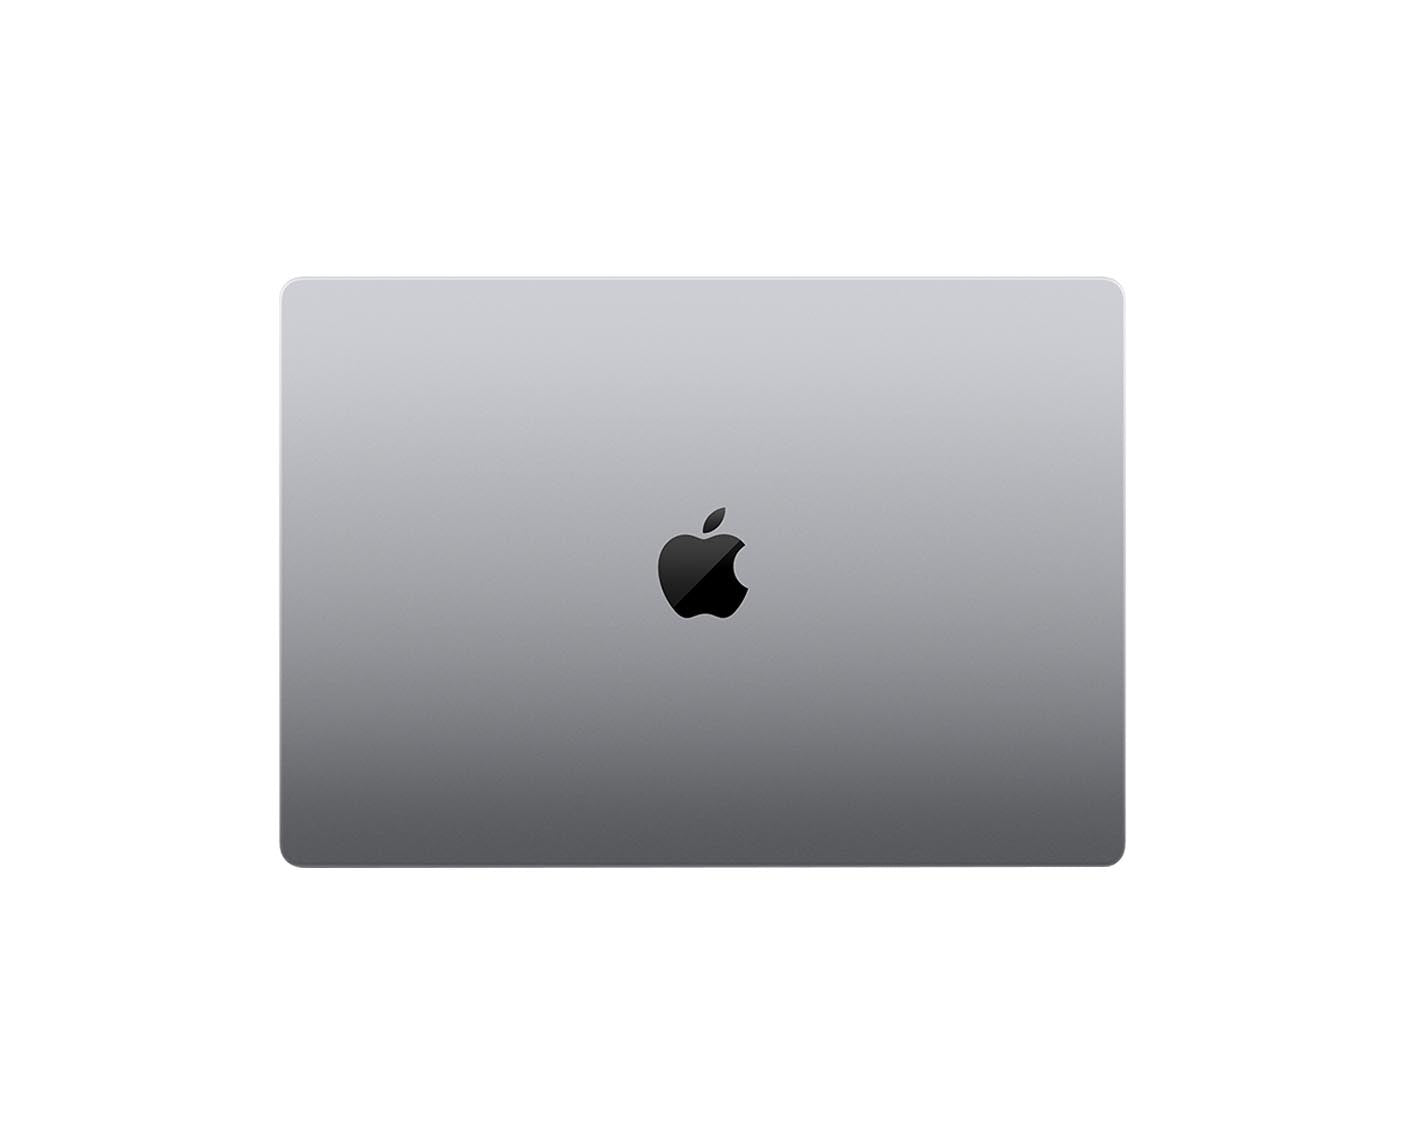 Macbook Pro 16-inch -  Apple M1 Max Chip  - Space Grey